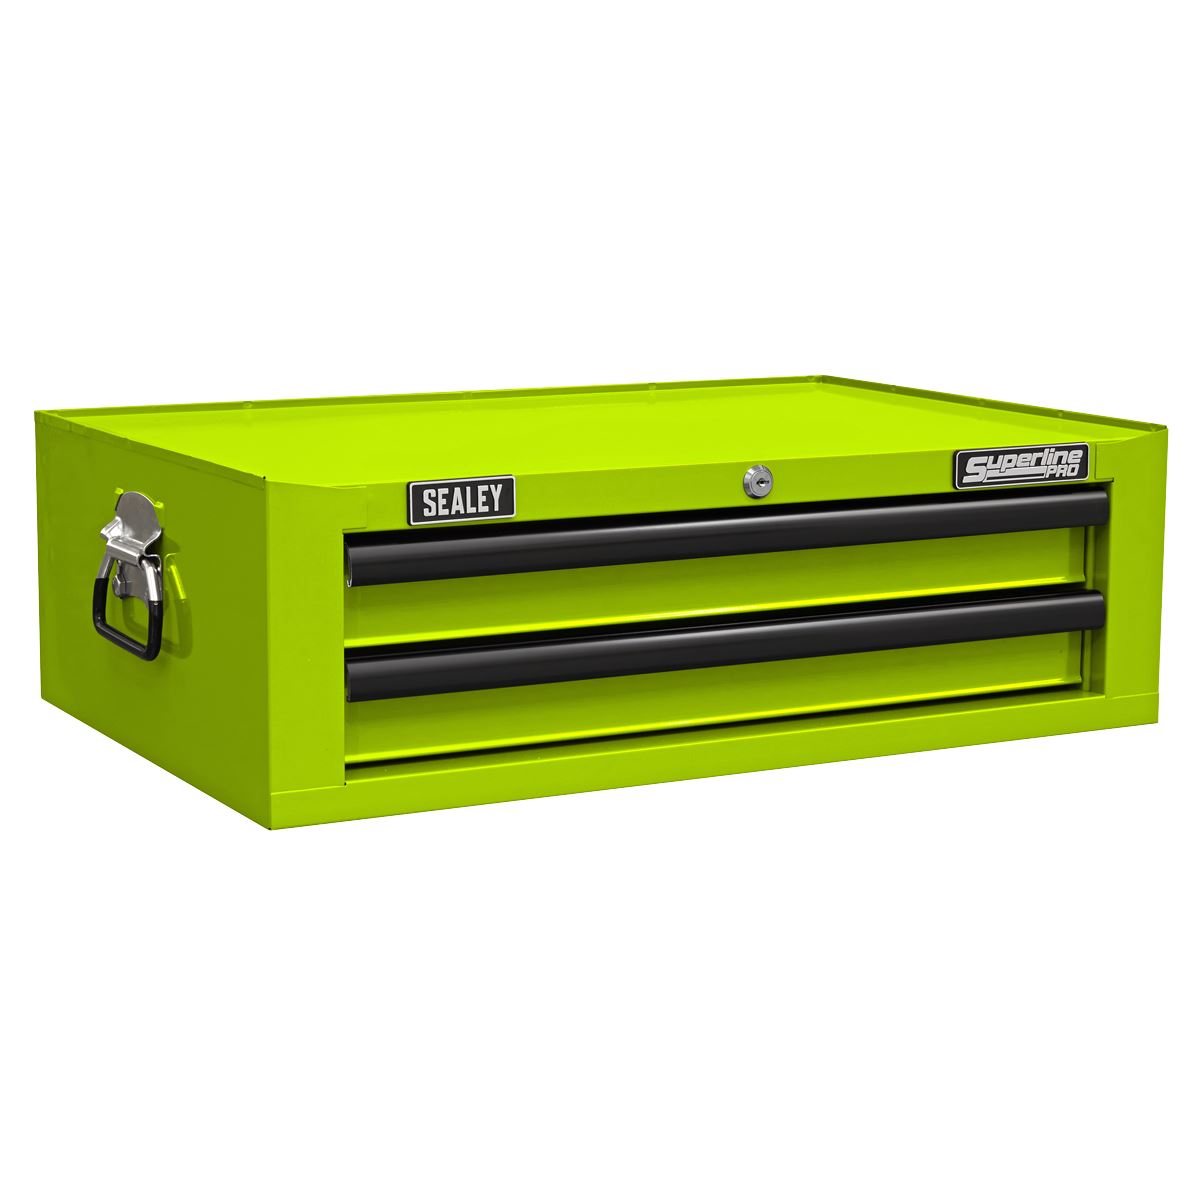 Sealey Superline Pro Mid-Box Tool Chest 2 Drawer with Ball-Bearing Slides - Green/Black